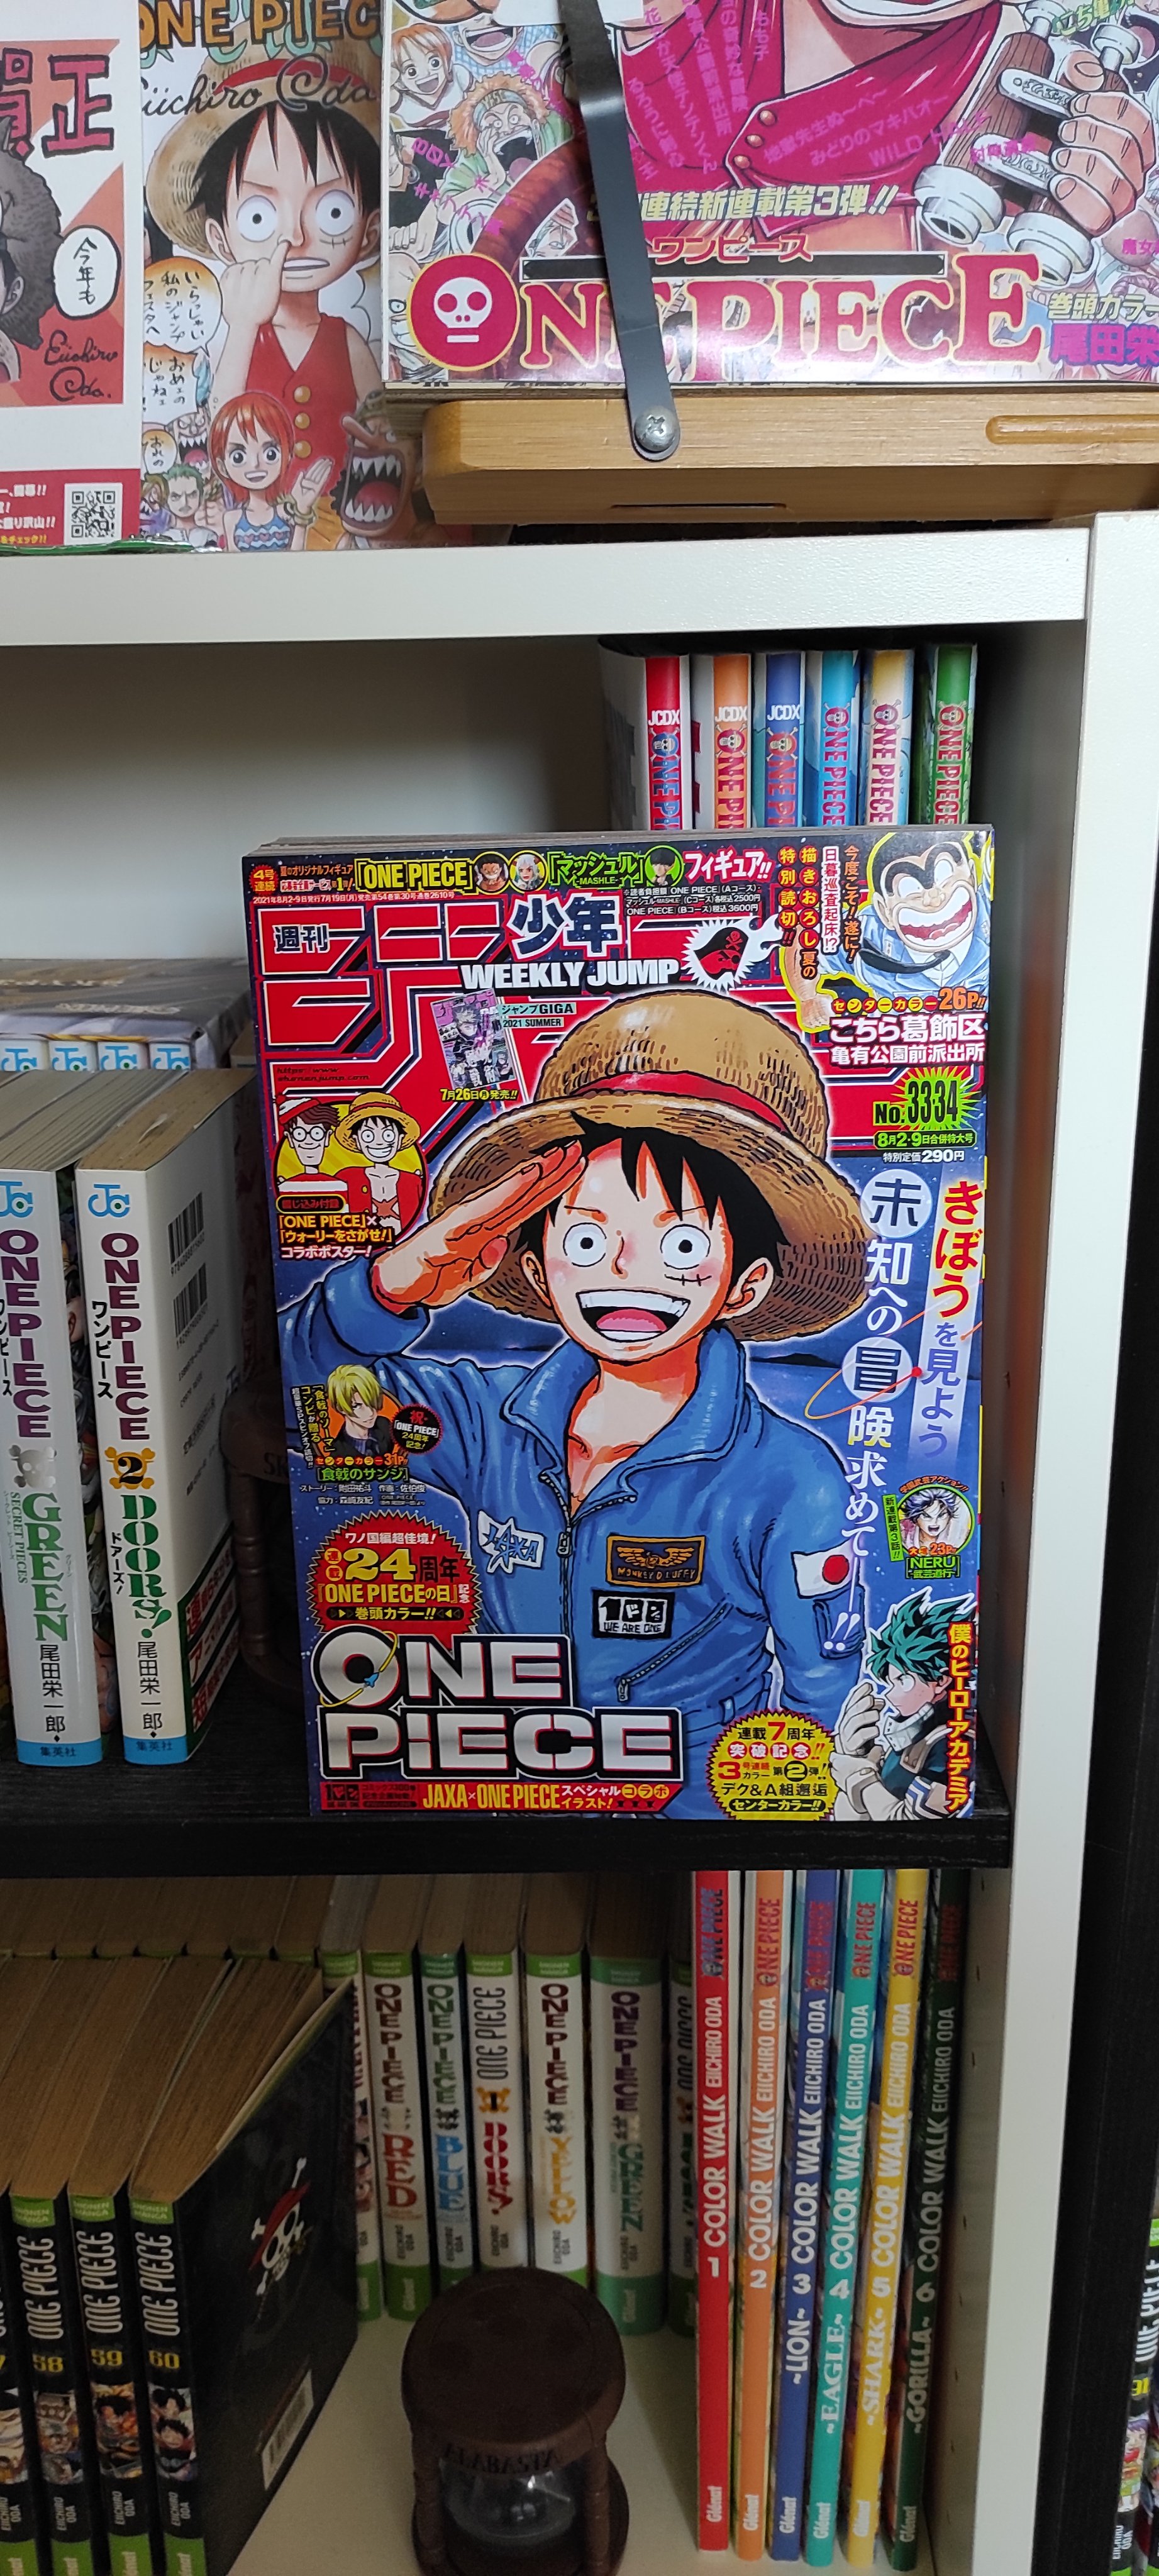 Baker ベイカー One Piece Fan Et Puis Le Weekly Shōnen Jump 21 N 33 34 Avec Une Page De Journal Pour Le Projet Jaxa Onepiece Onepiececollection Onepiece部屋 ワンピース ひとつなぎの大秘宝 ワンピース部屋